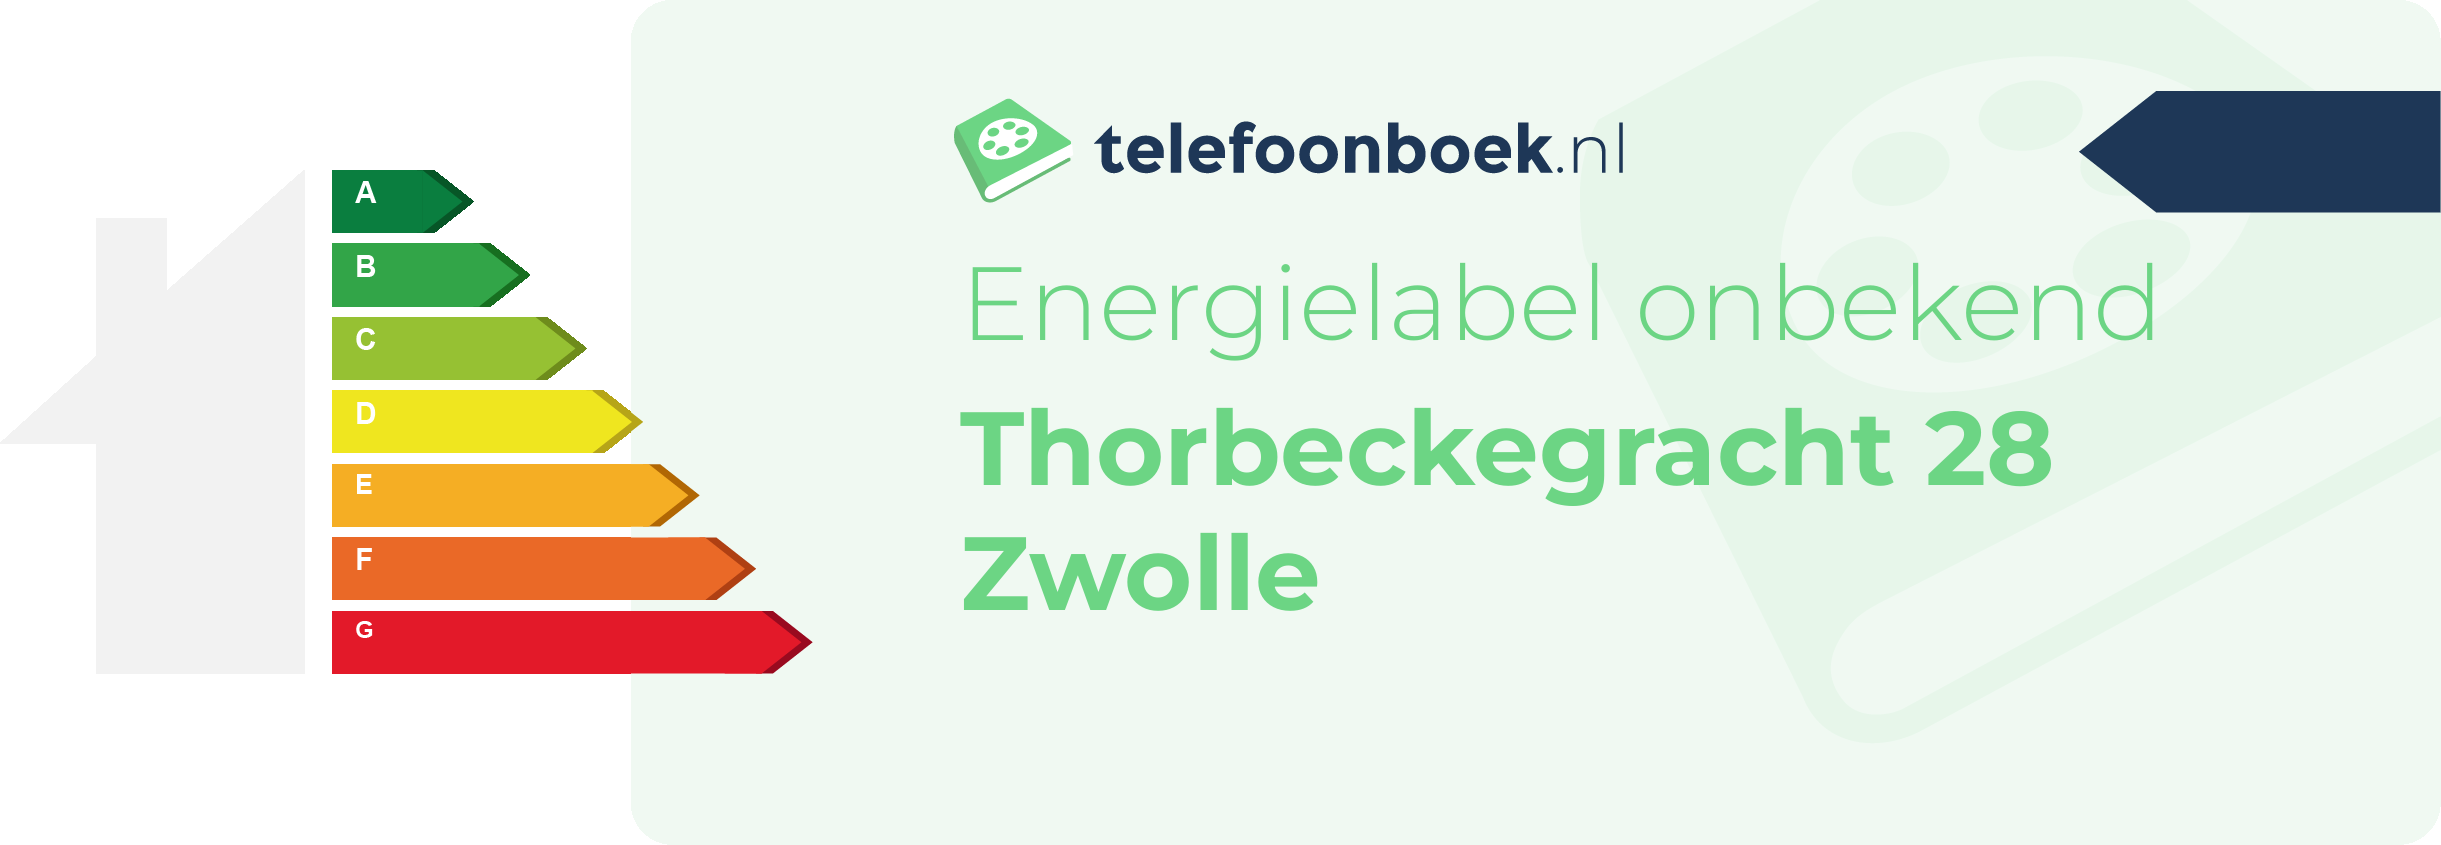 Energielabel Thorbeckegracht 28 Zwolle